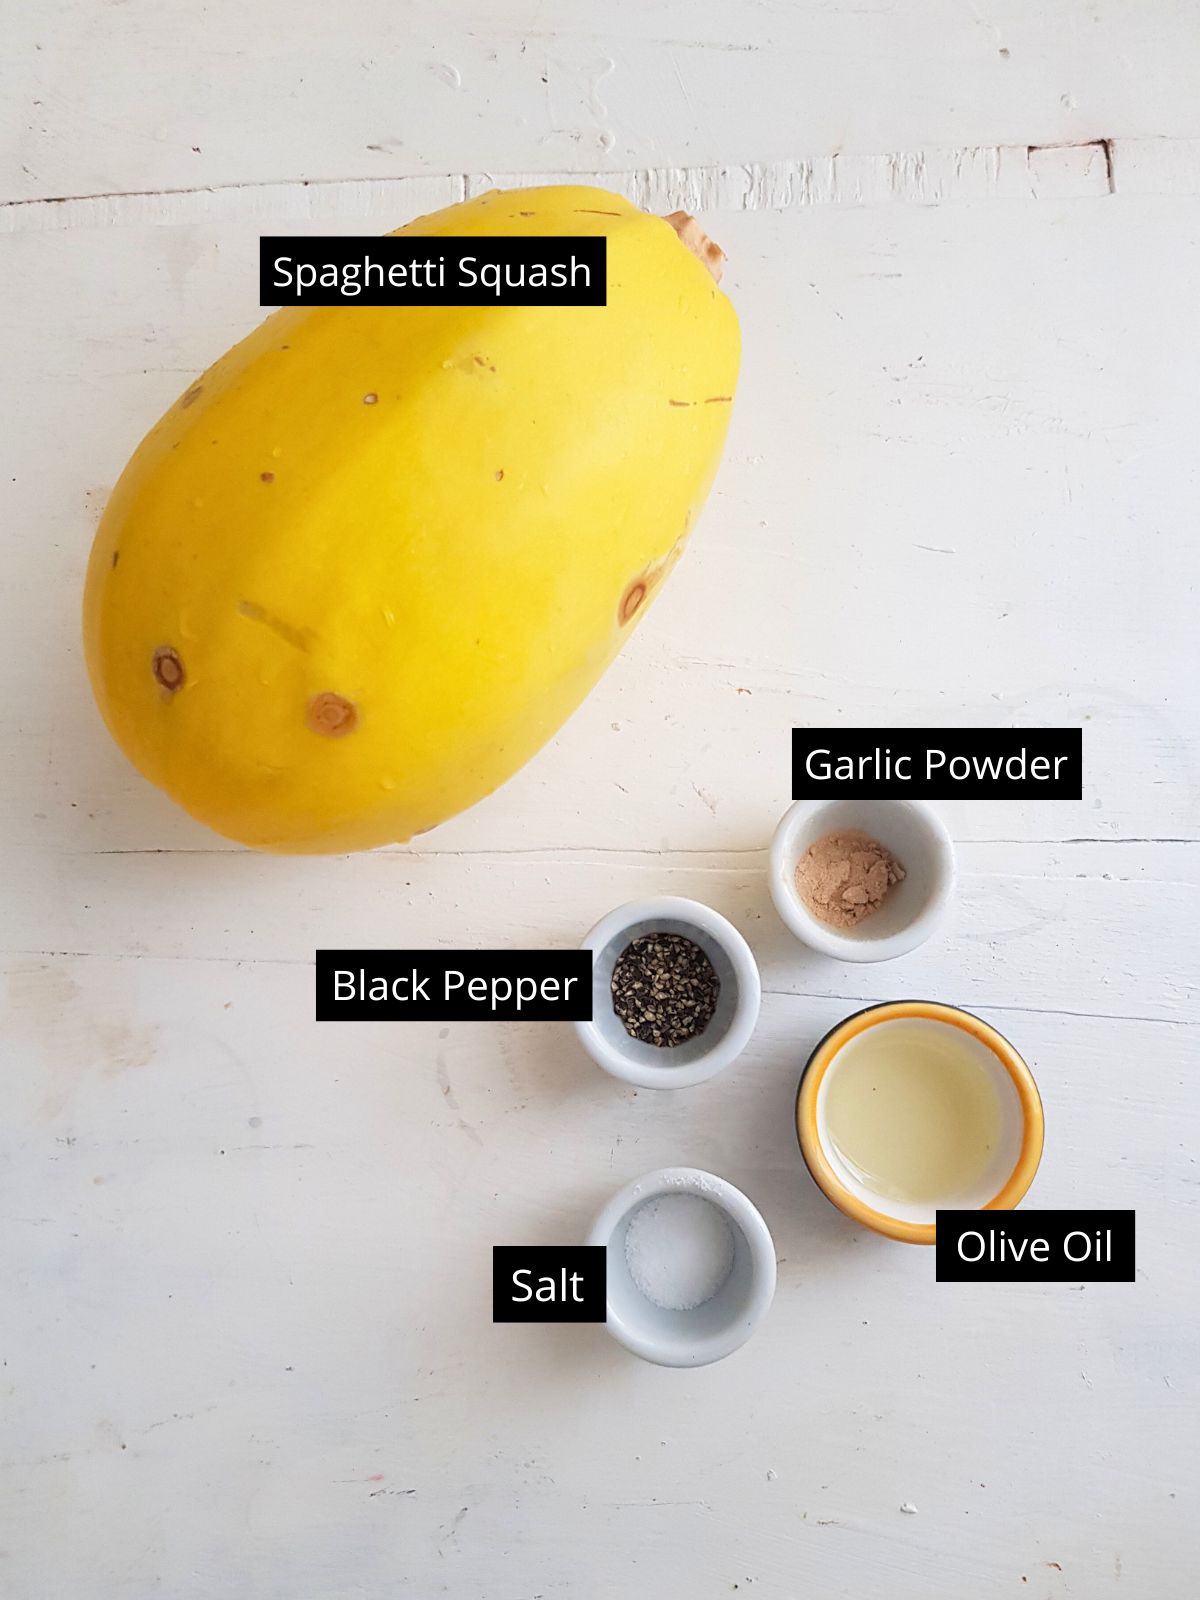 ingredients to make spaghetti squash in air fryer placed on a white background.